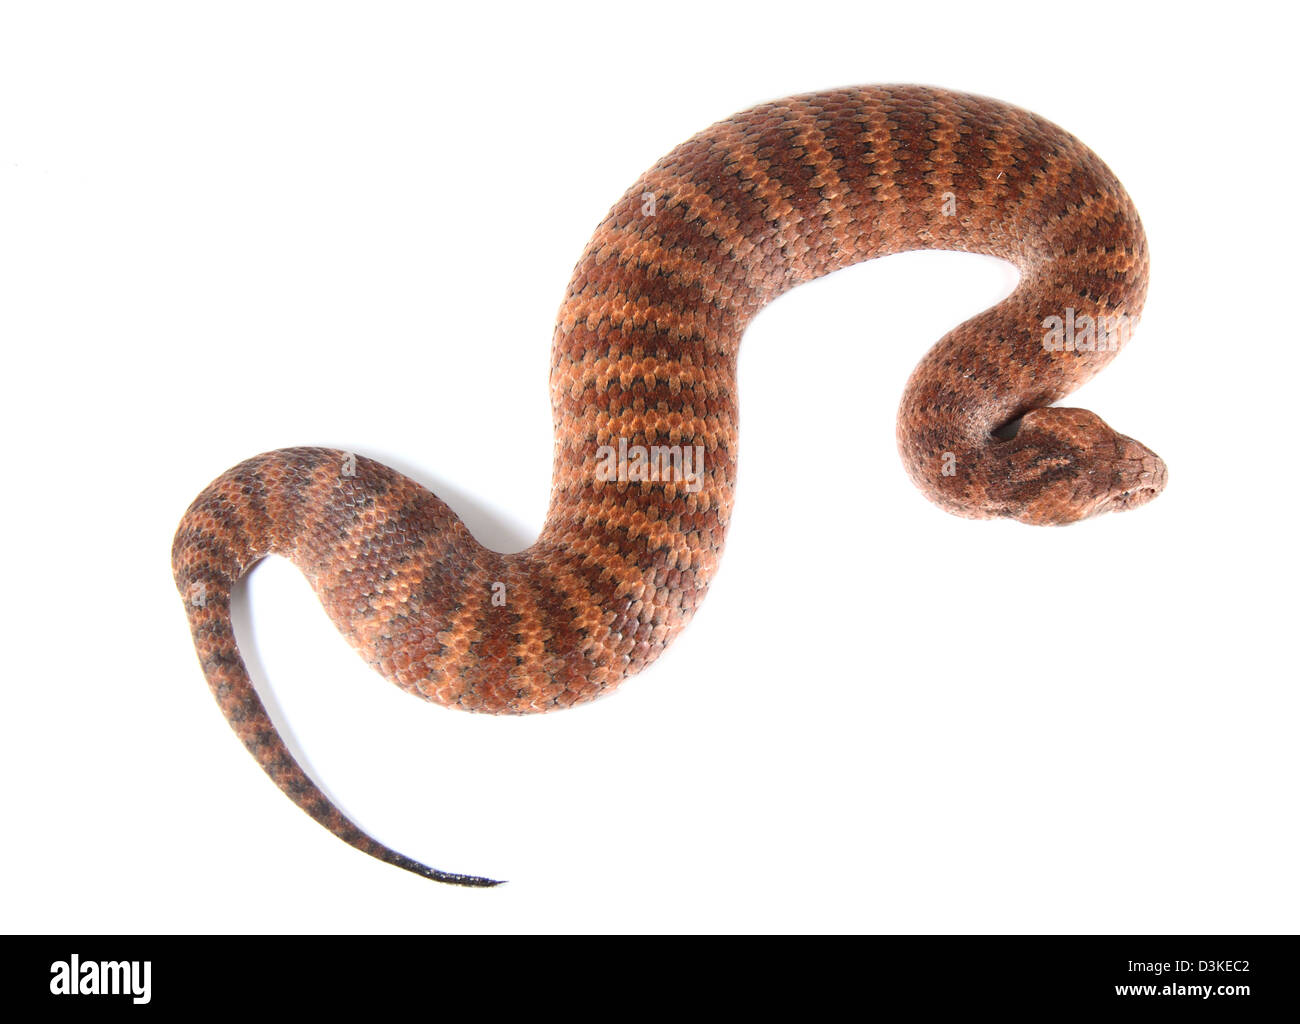 Common death adder acanthophis antacticus Australian reptil photographed in a studio with a white background ready for cut-out Stock Photo